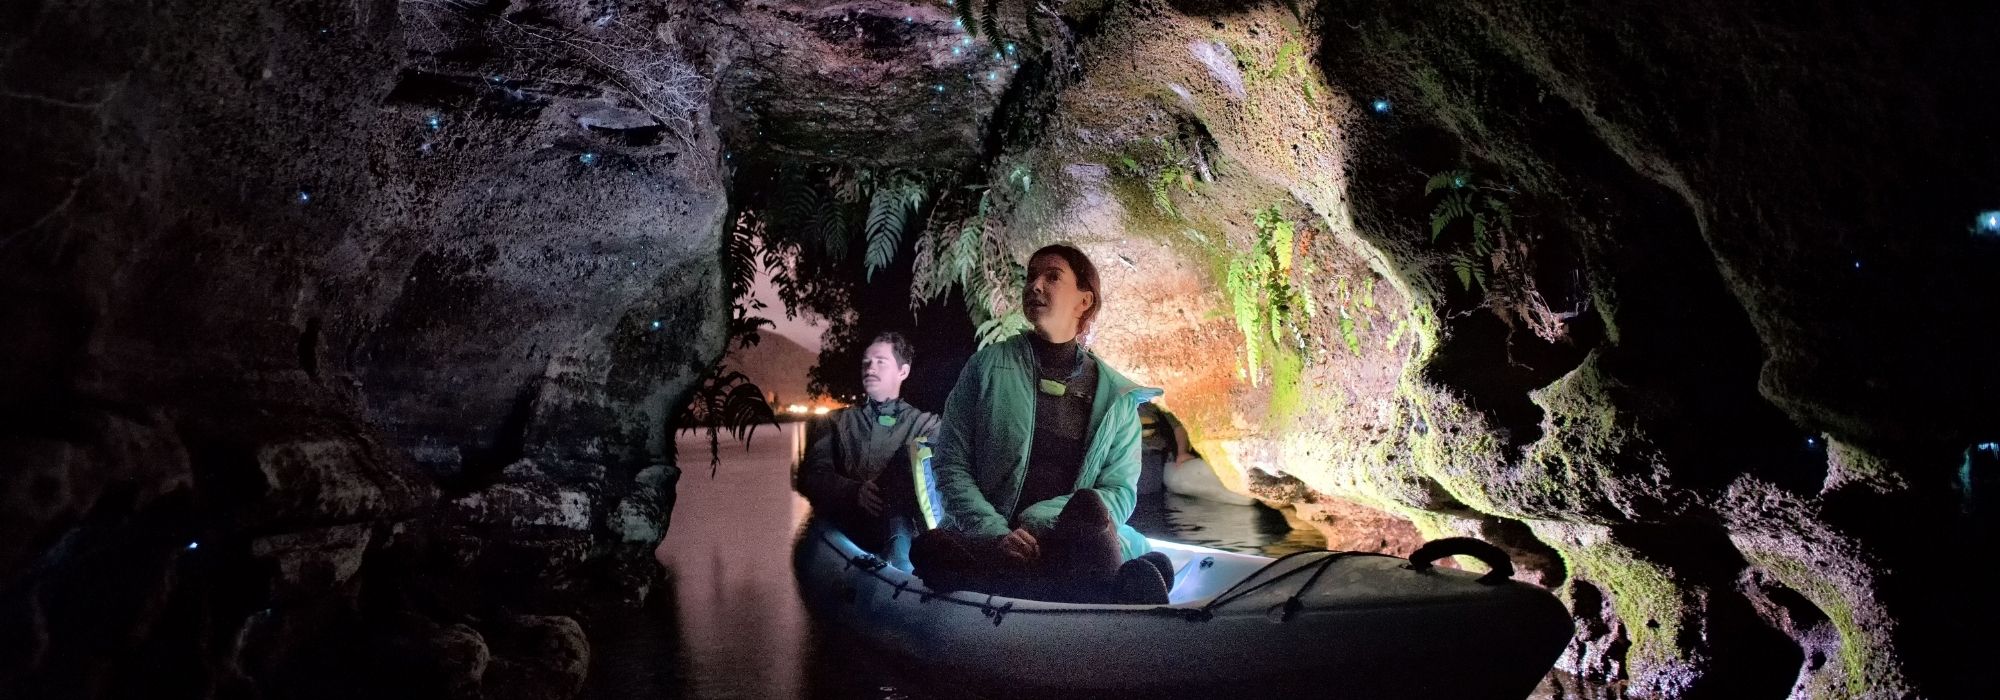 7 night-time experiences you won't forget